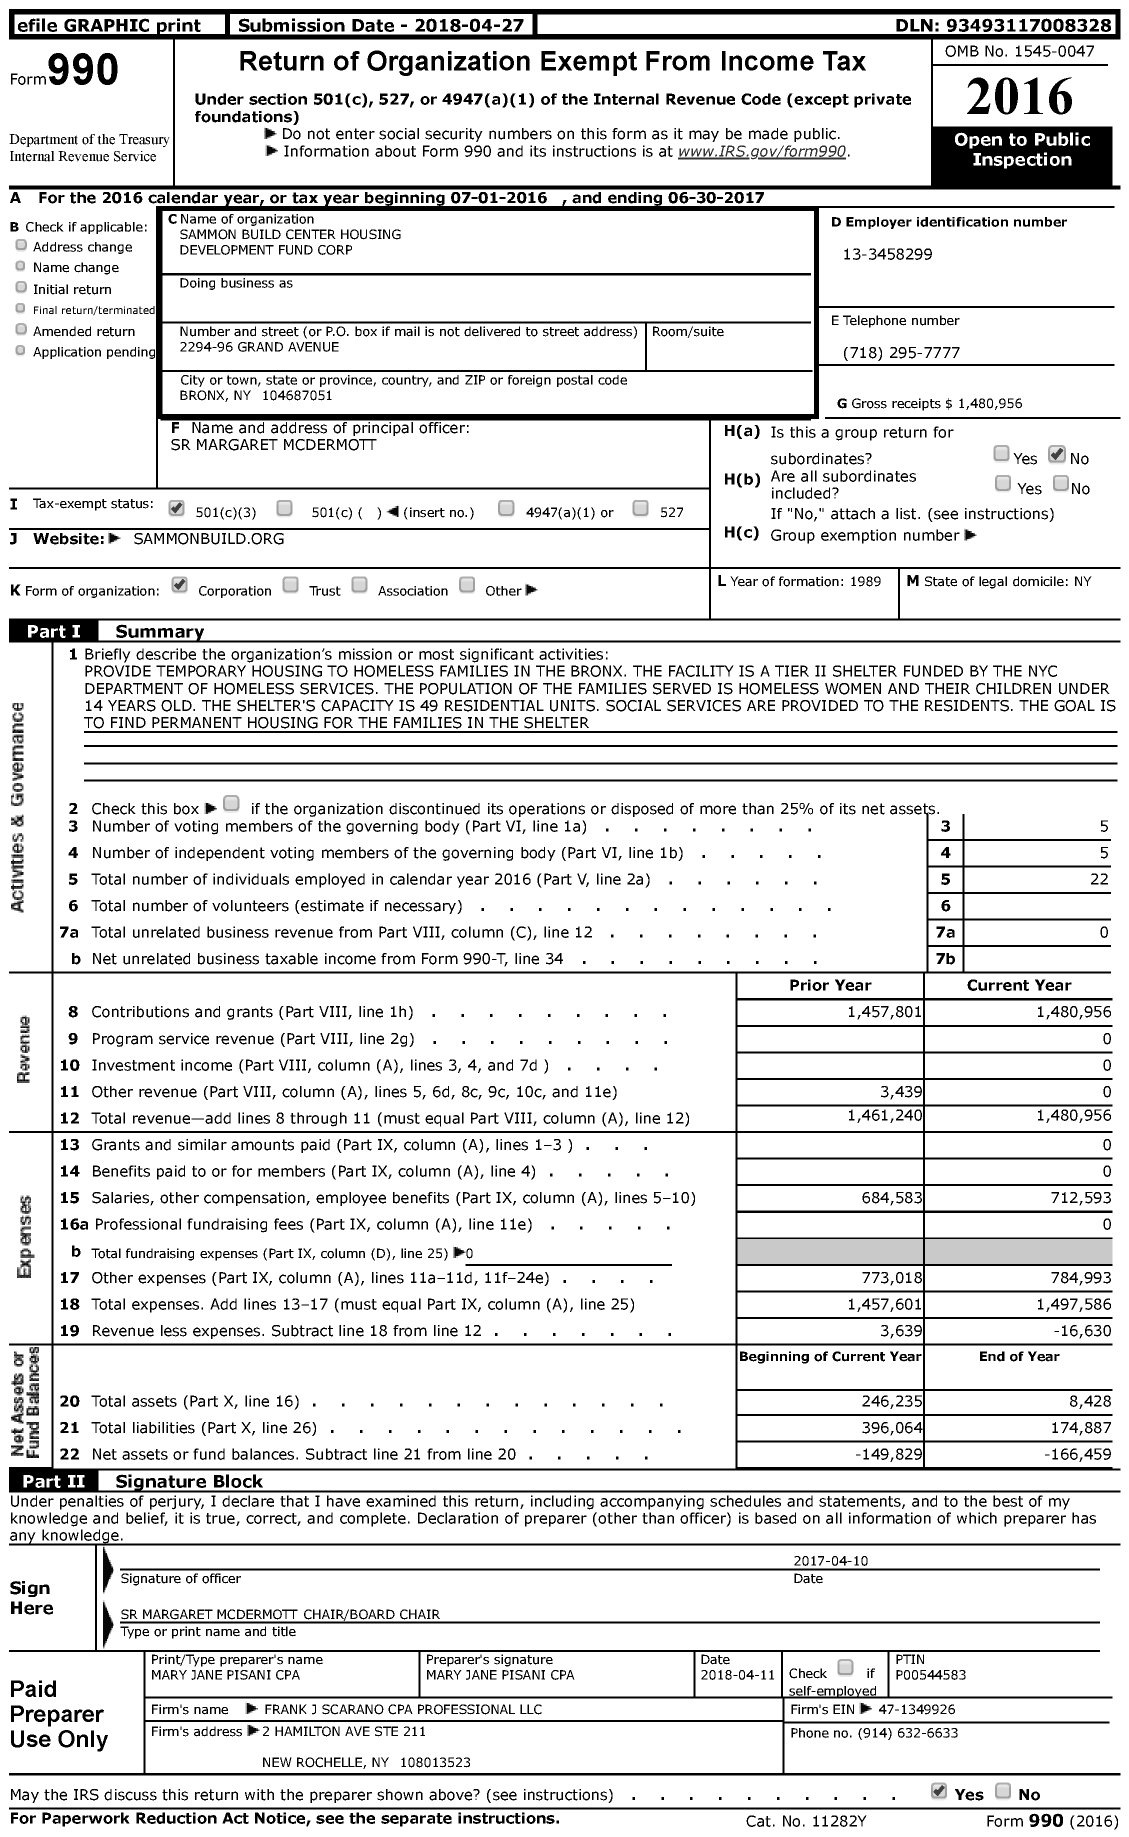 Image of first page of 2016 Form 990 for Sammon Build Center Housing Development Fund Corporation